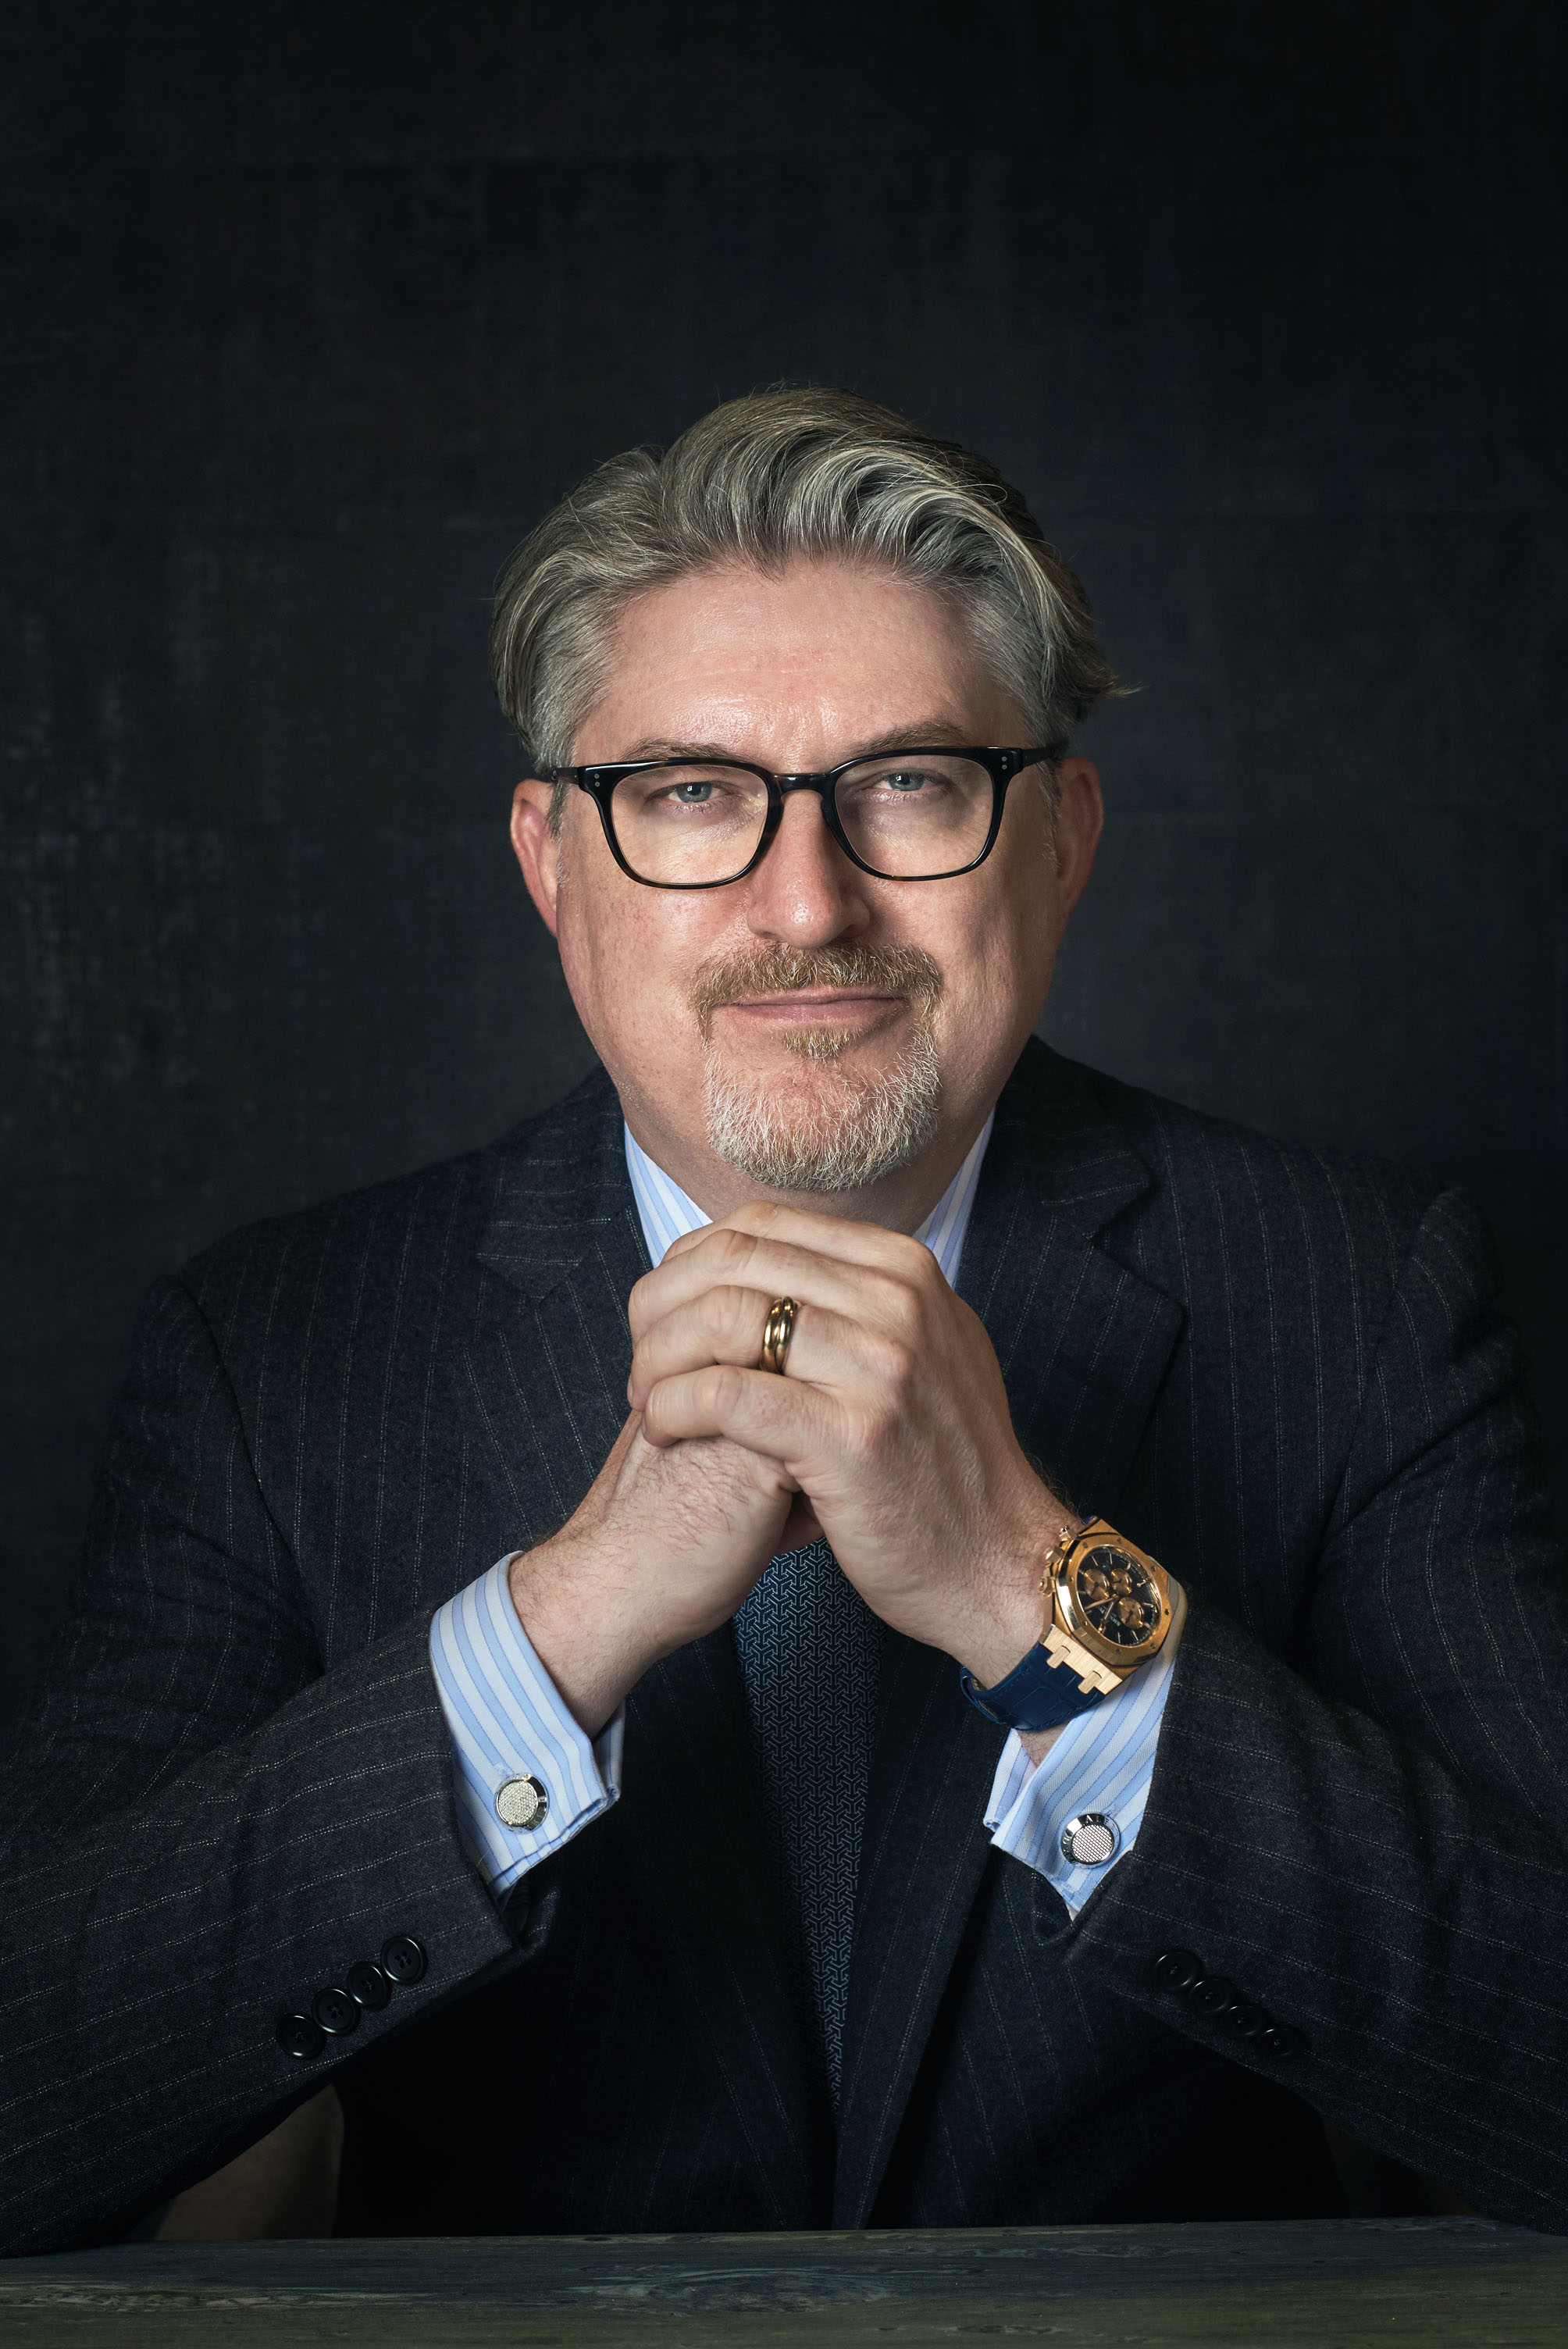 Audemars Piguet’s newly appointed king